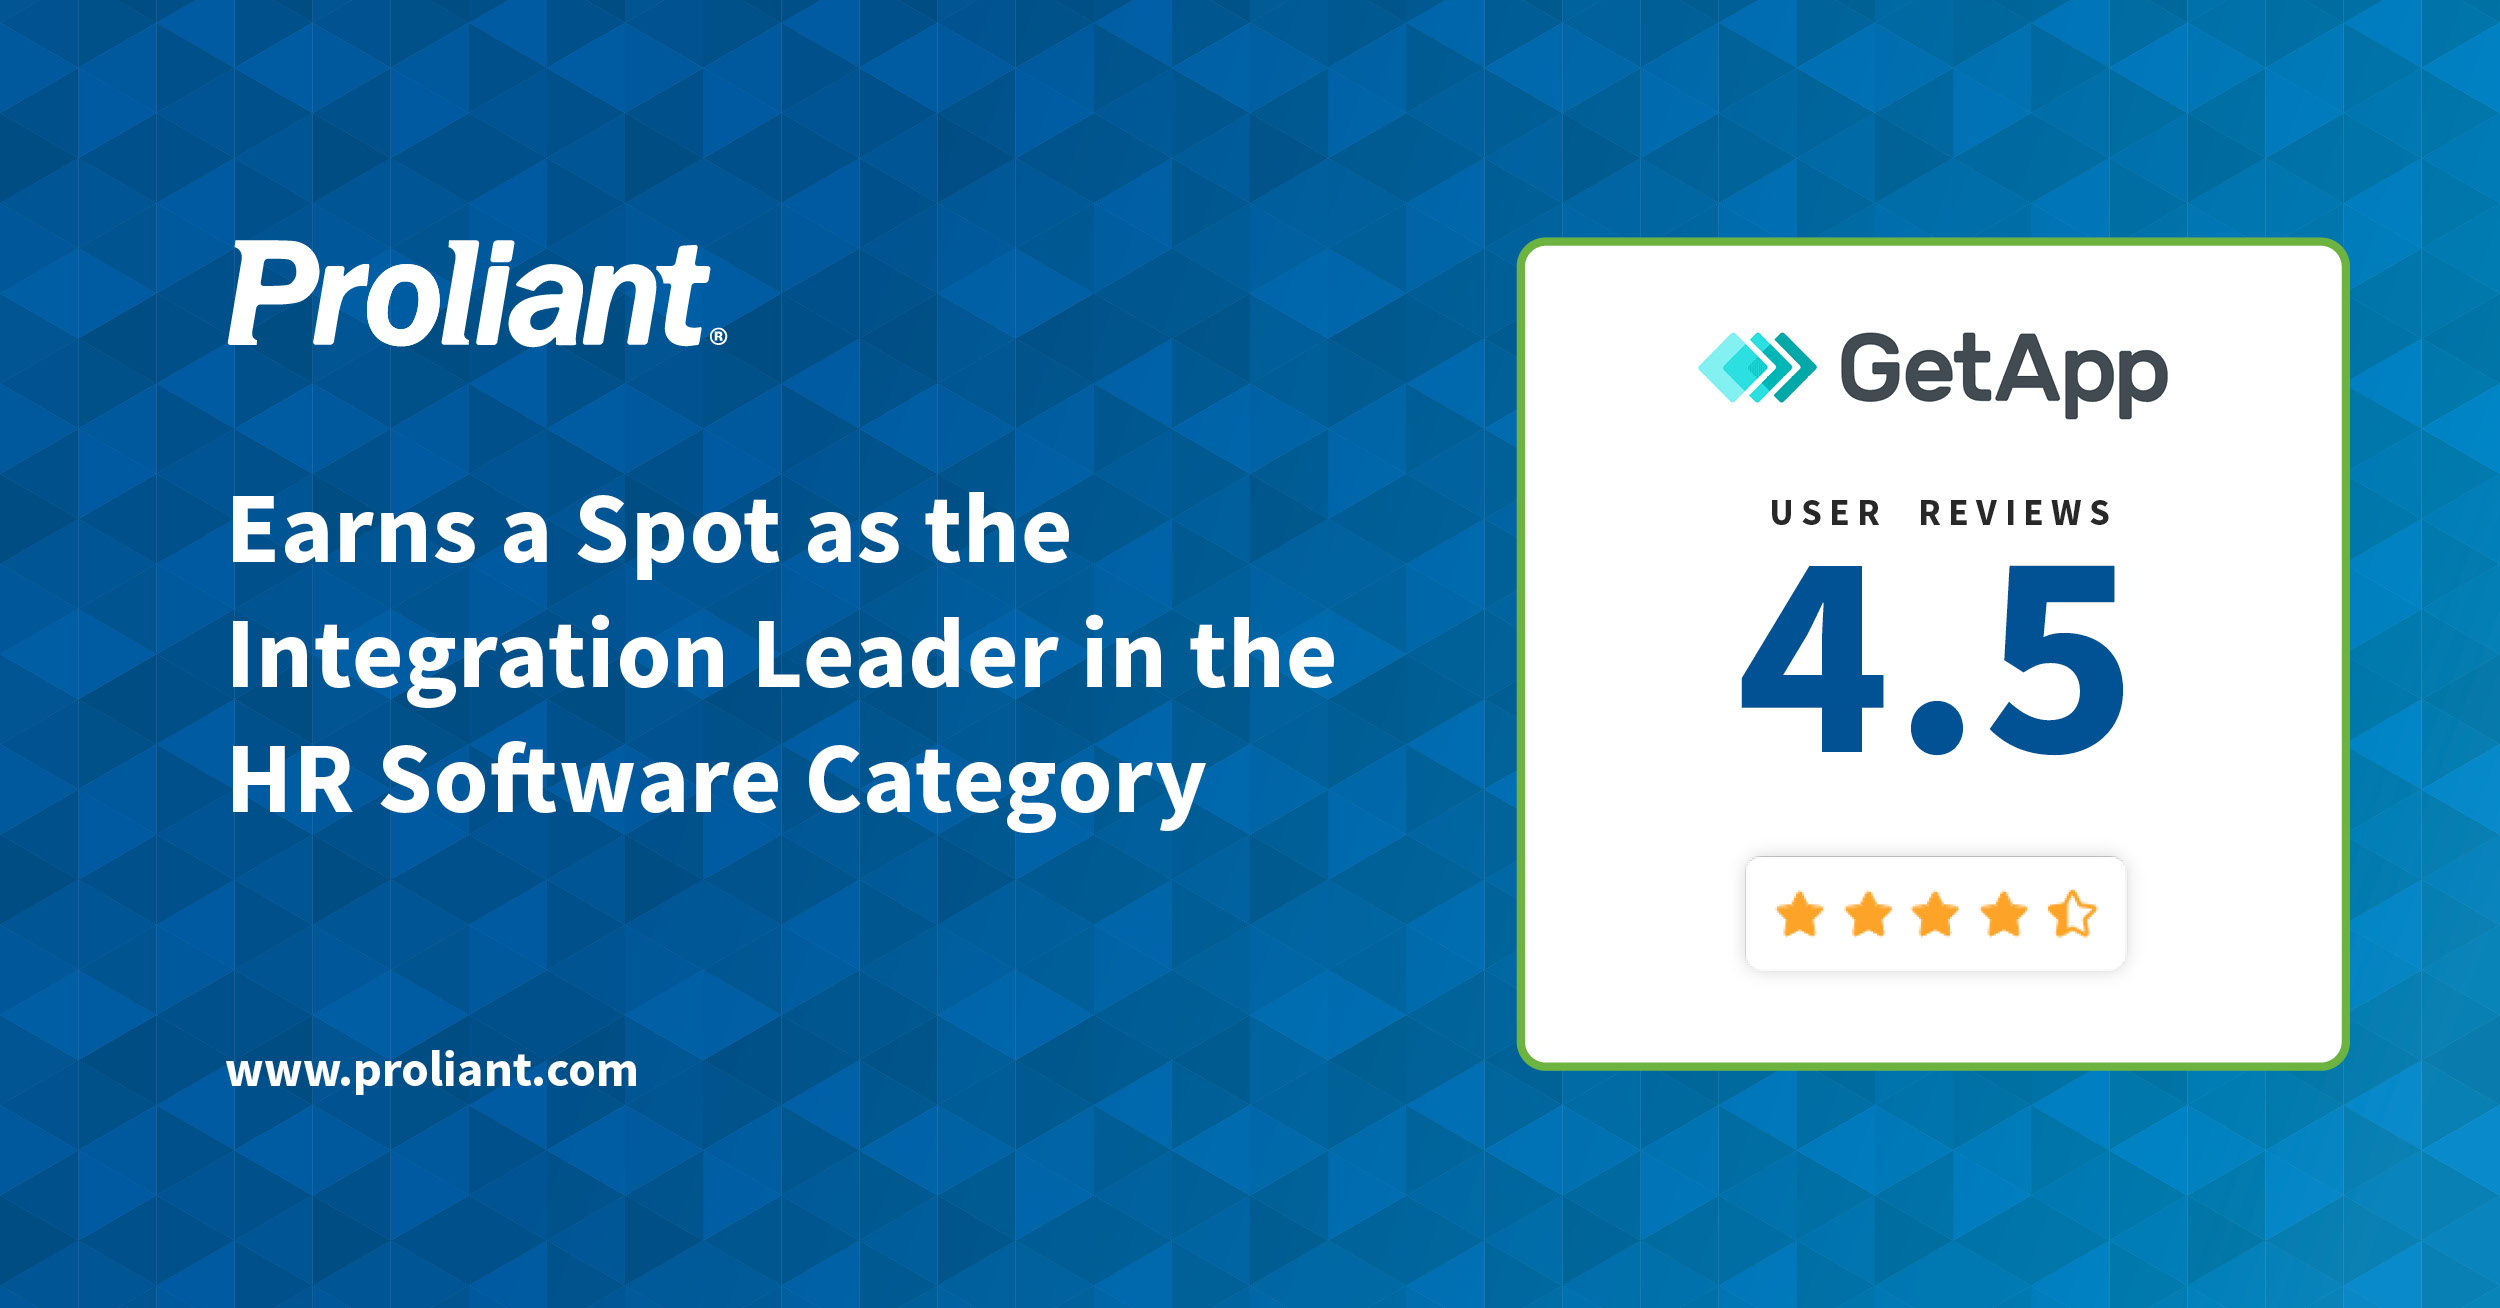 Proliant Earns a Spot as the Integration Leader in the HR Software Category